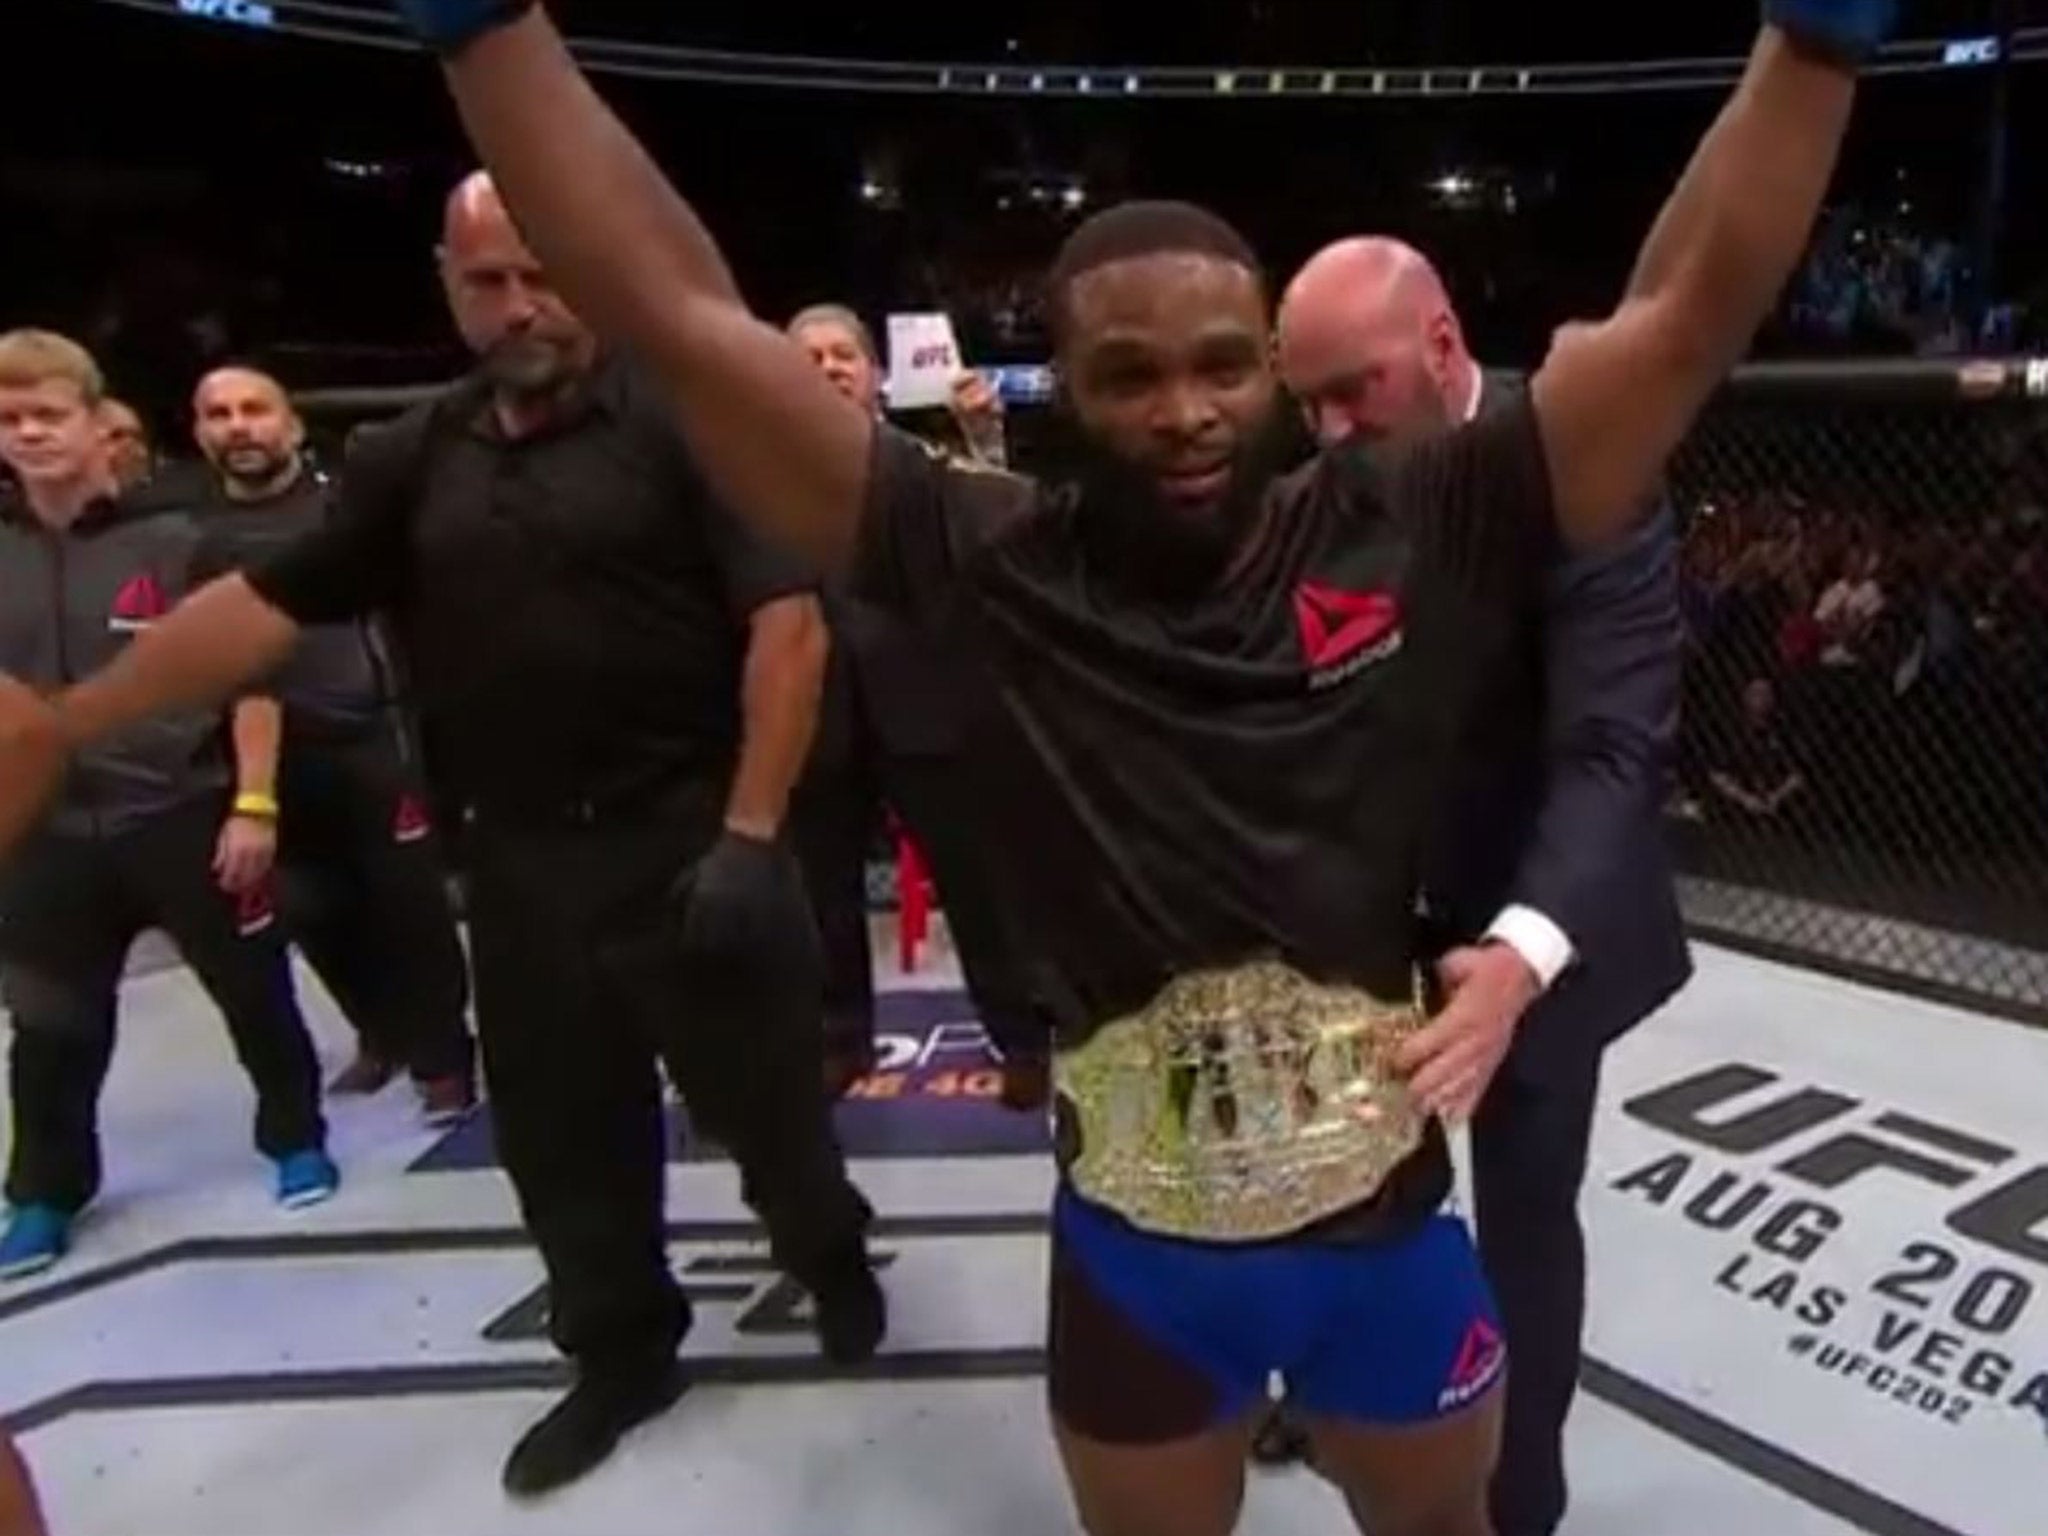 Tyron Woodley celebrates winning the UFC welterweight title after knocking out Robbie Lawler